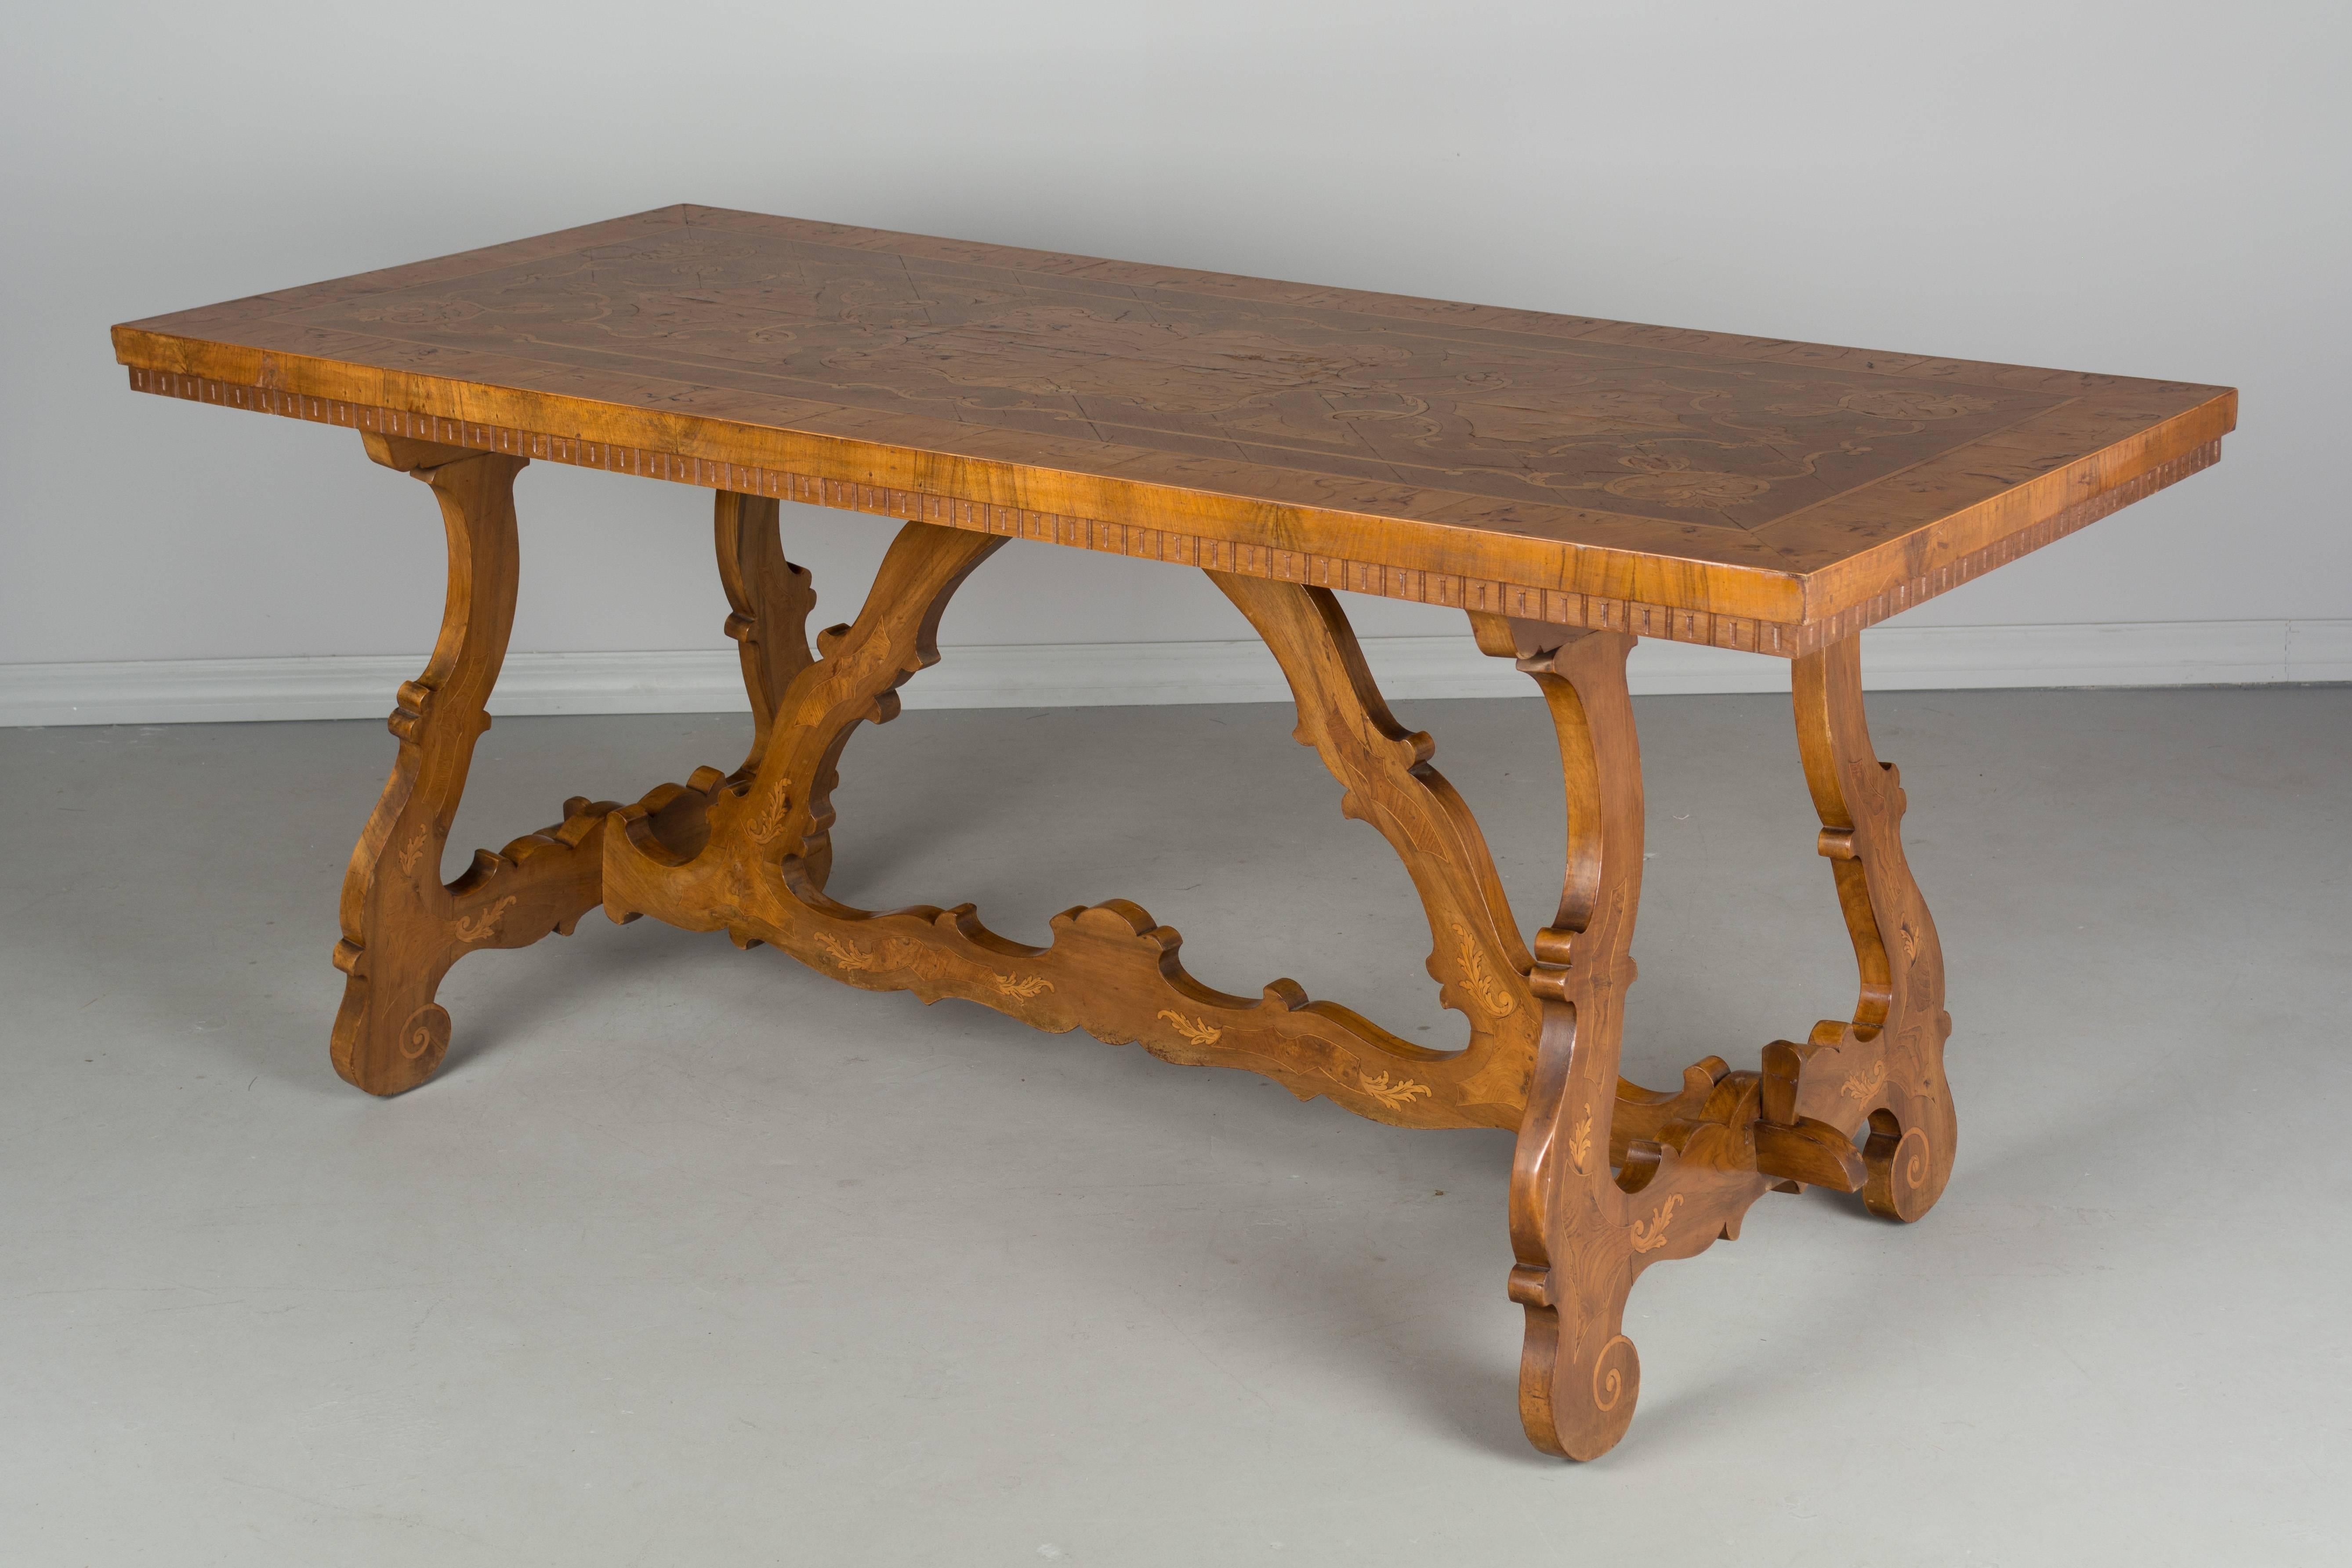 A French marquetry center table made of solid walnut with burl of elm inlay. Sculptural Spanish Baroque style trestle type base with lyre shaped legs and stretcher. The rectangular top has beautiful inlaid decoration with bookmatched veneer and